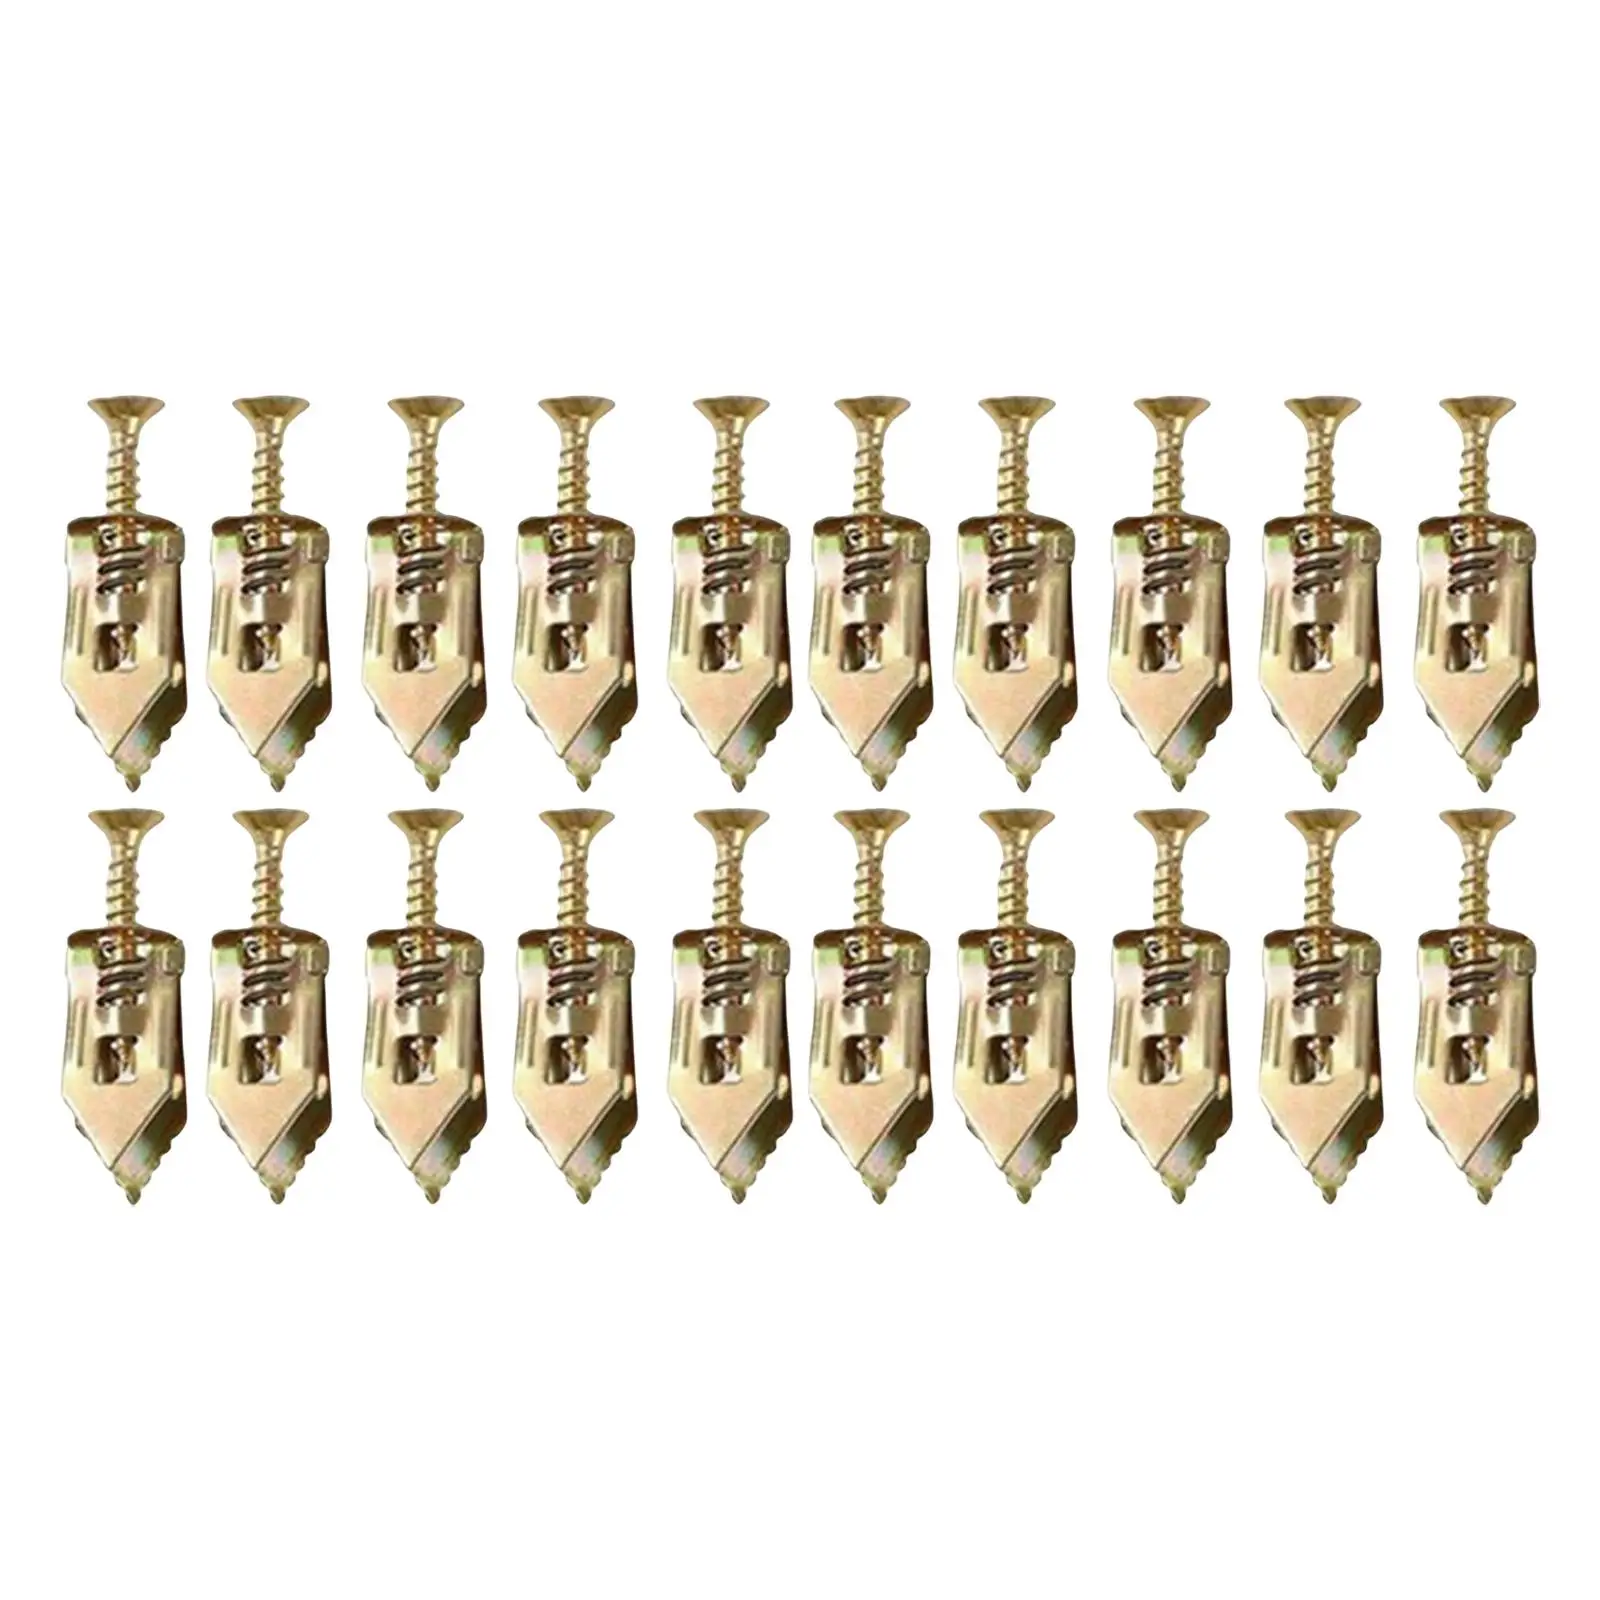 20x Drywall Self drill Anchors with Screws No Drill Holes in Wall Expansion Screw Set for Fixing picture Cabinets